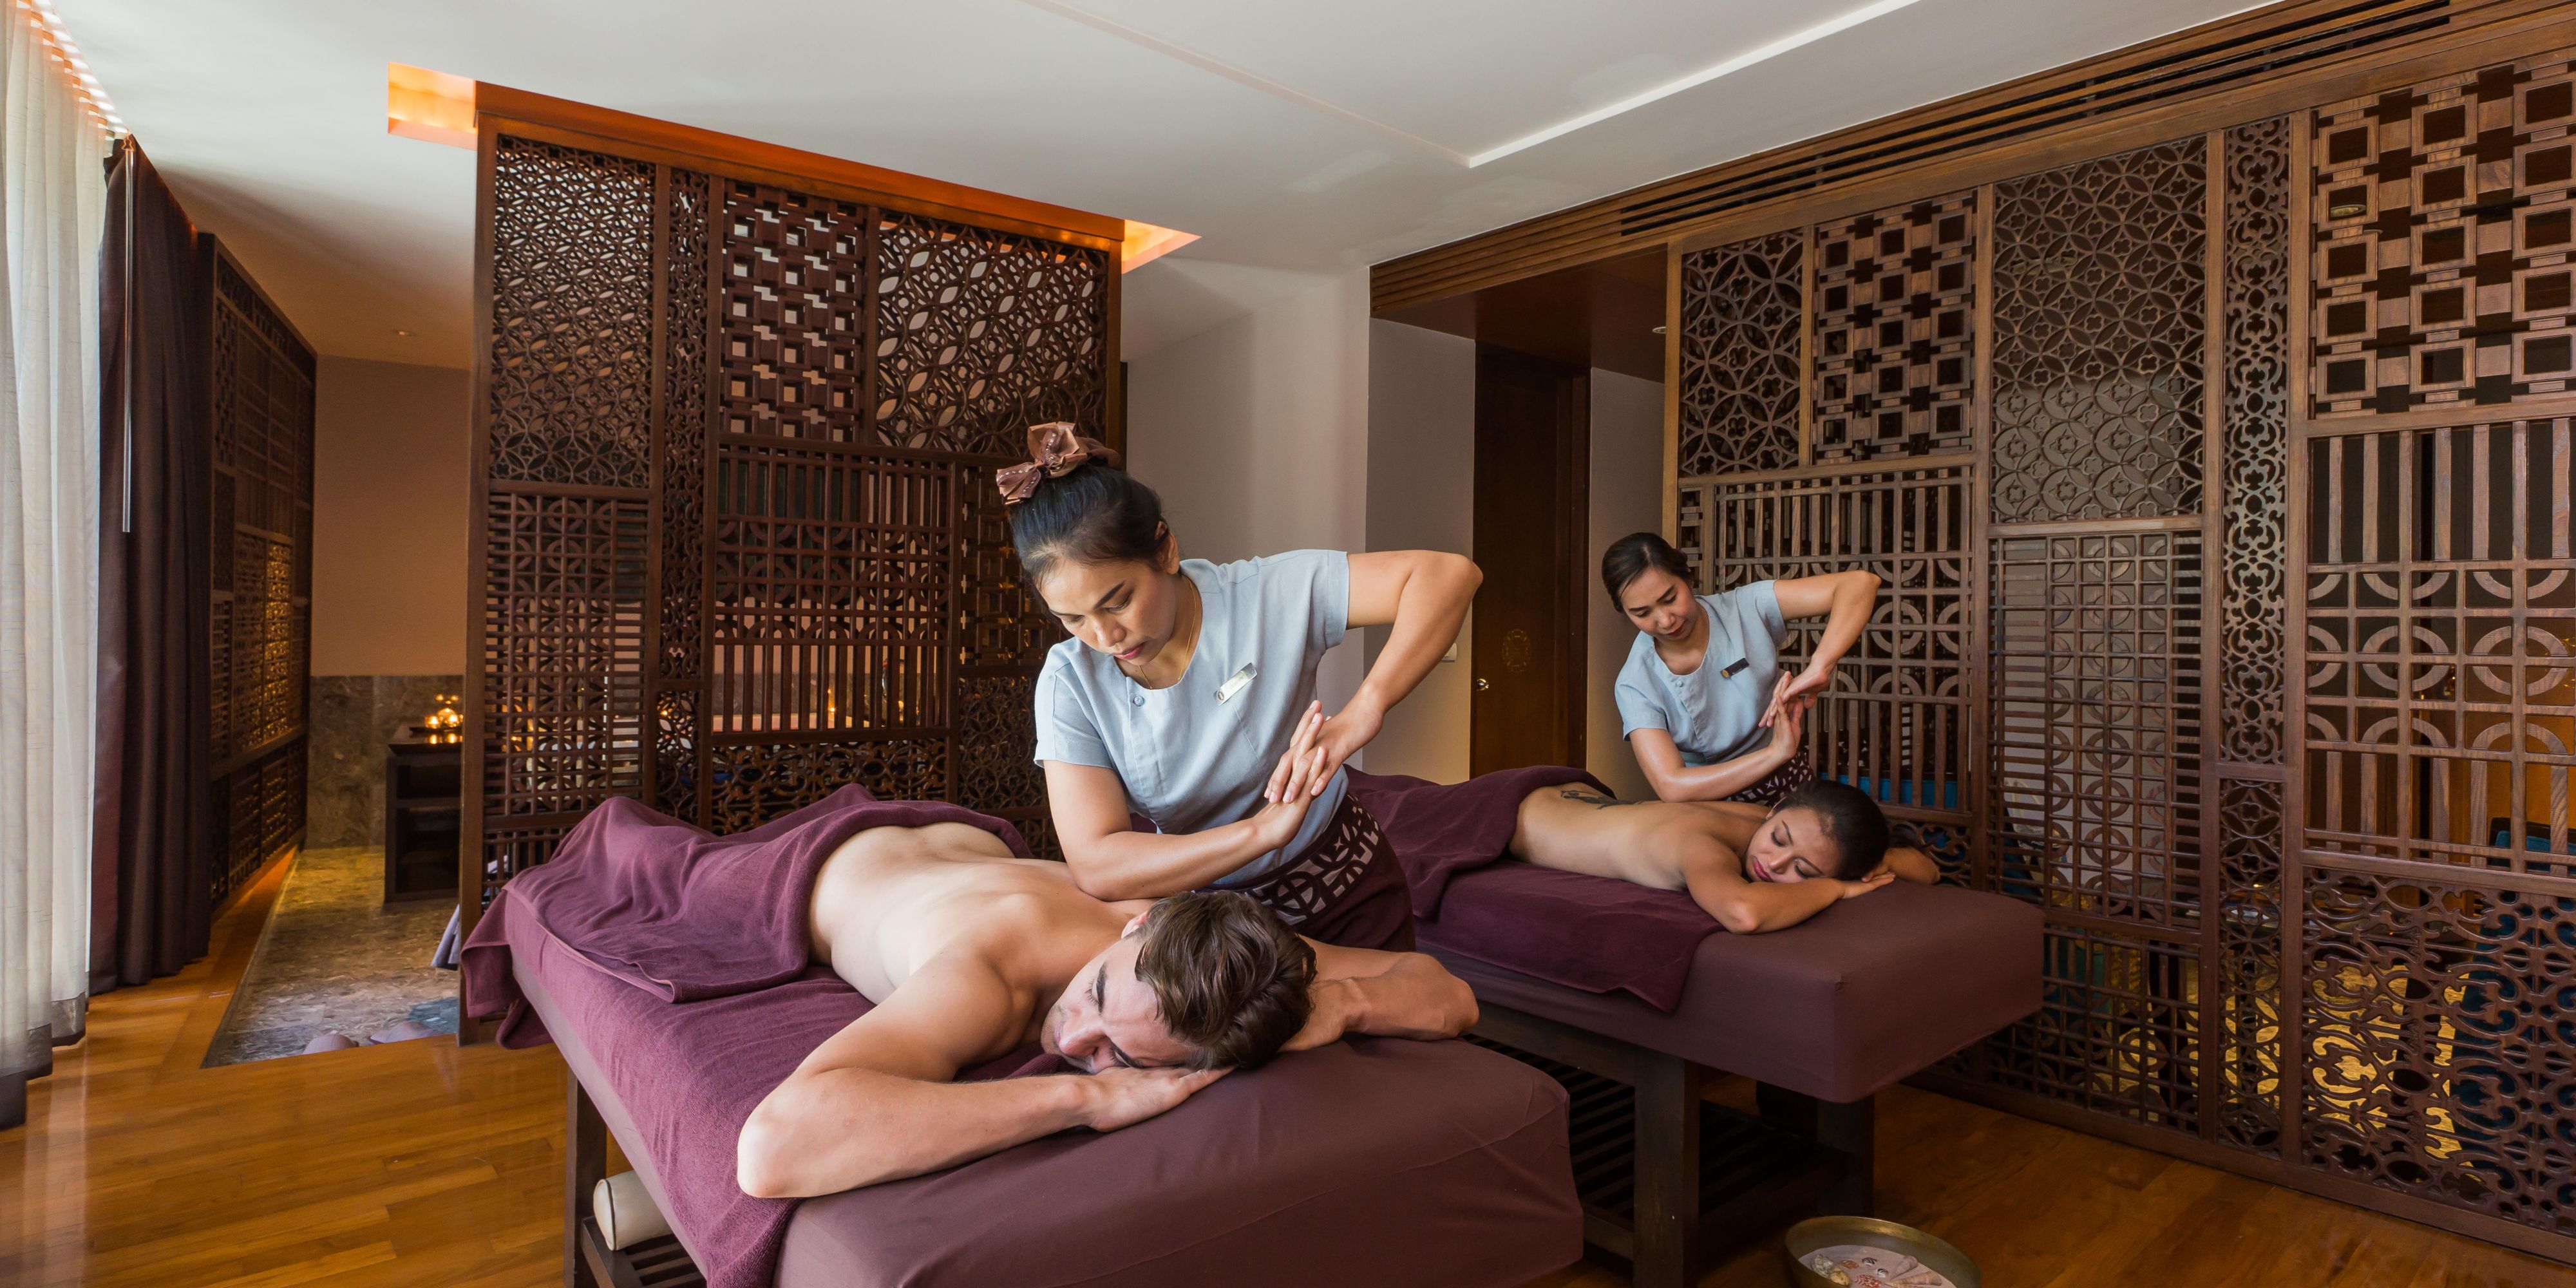 Leave the world outside and enter the sanctuary of our tranquil spa by the sea. SPA InterContinental Hua Hin welcomes you with a refreshing towel, a herbal drink, and a mini fruit stick set to begin your journey to bliss in a mood of calm relaxation and health.